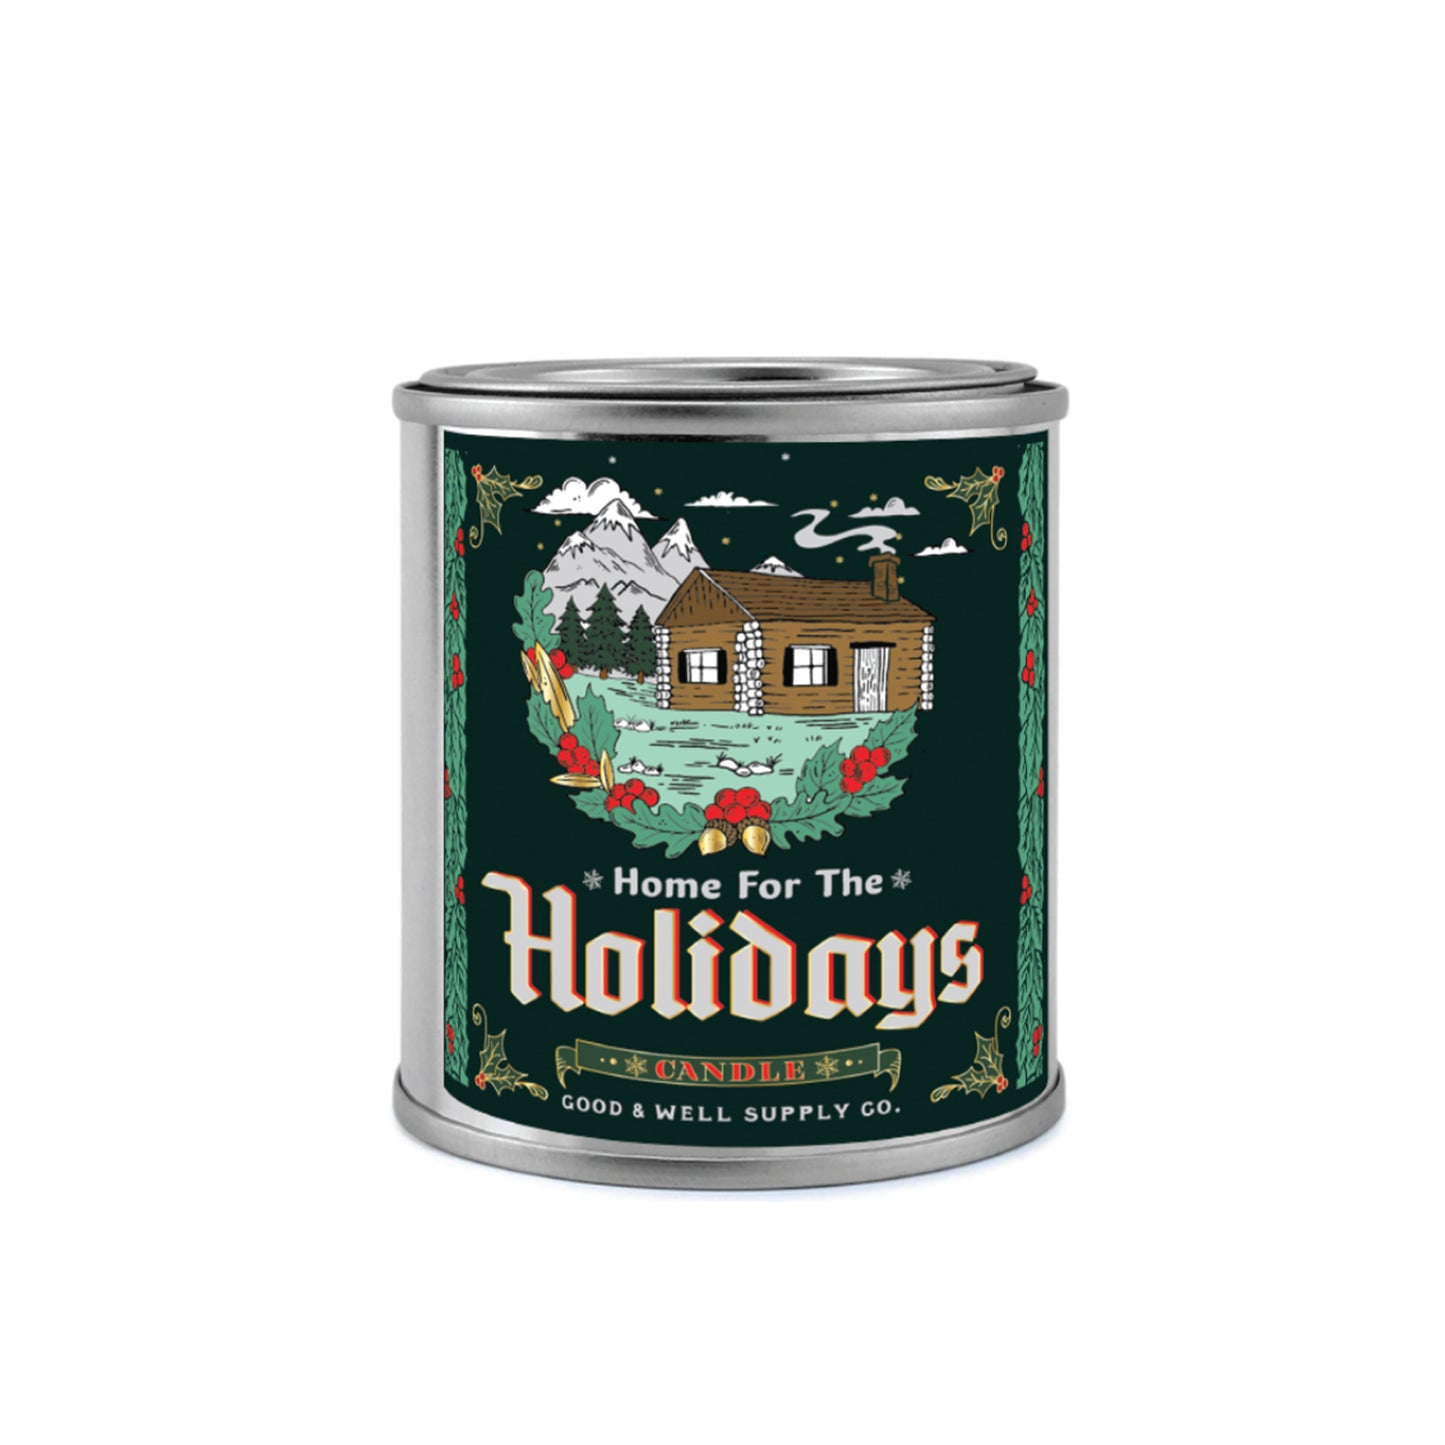 Home for the Holidays Candle 8oz